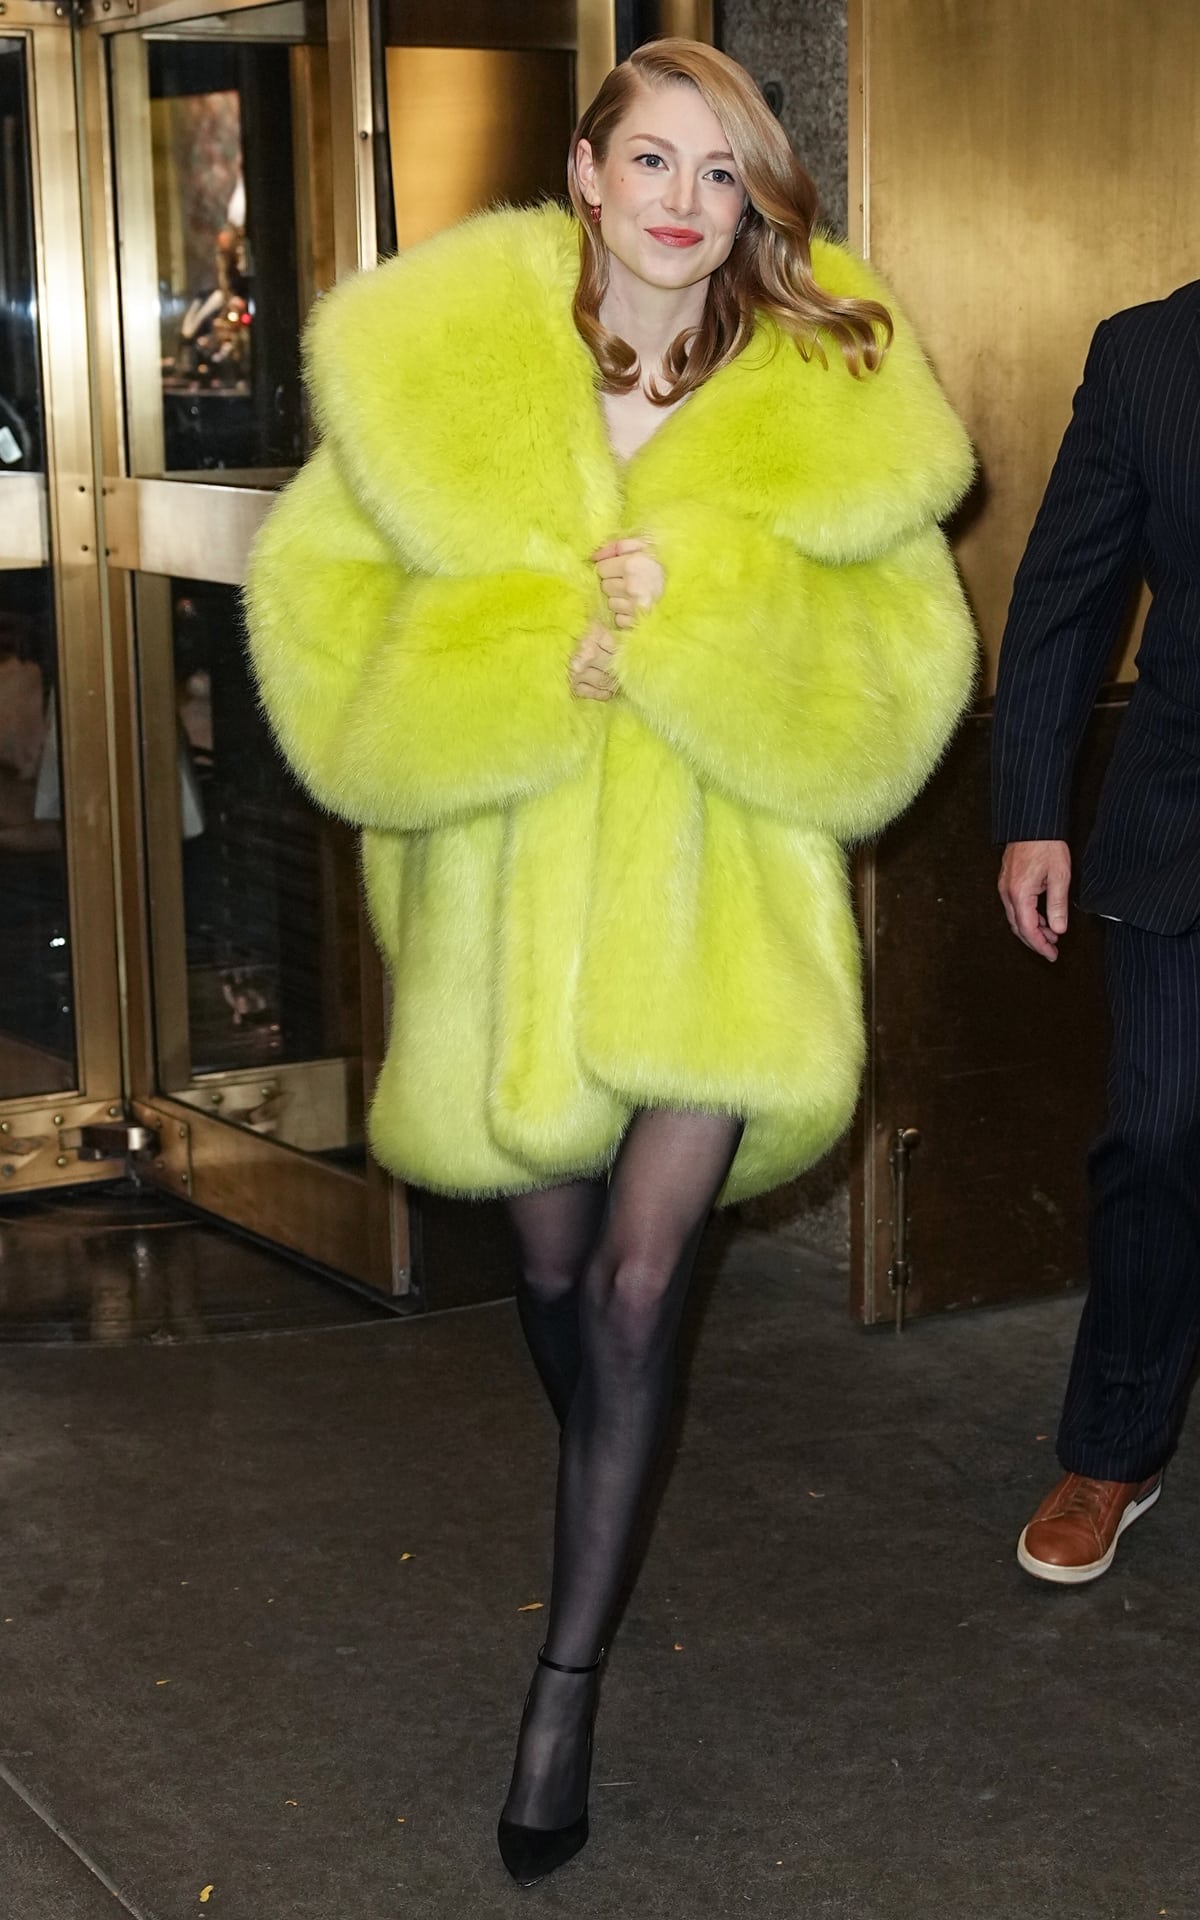 Hunter Schafer wore a vibrant yellow hooded fur coat from Alexandre Vauthier's Fall 2023 collection, paired with sheer black tights and black ankle strap pumps, during her appearance on "The Tonight Show with Jimmy Fallon" on November 17th to promote "The Hunger Games: The Ballad of Songbirds & Snakes"